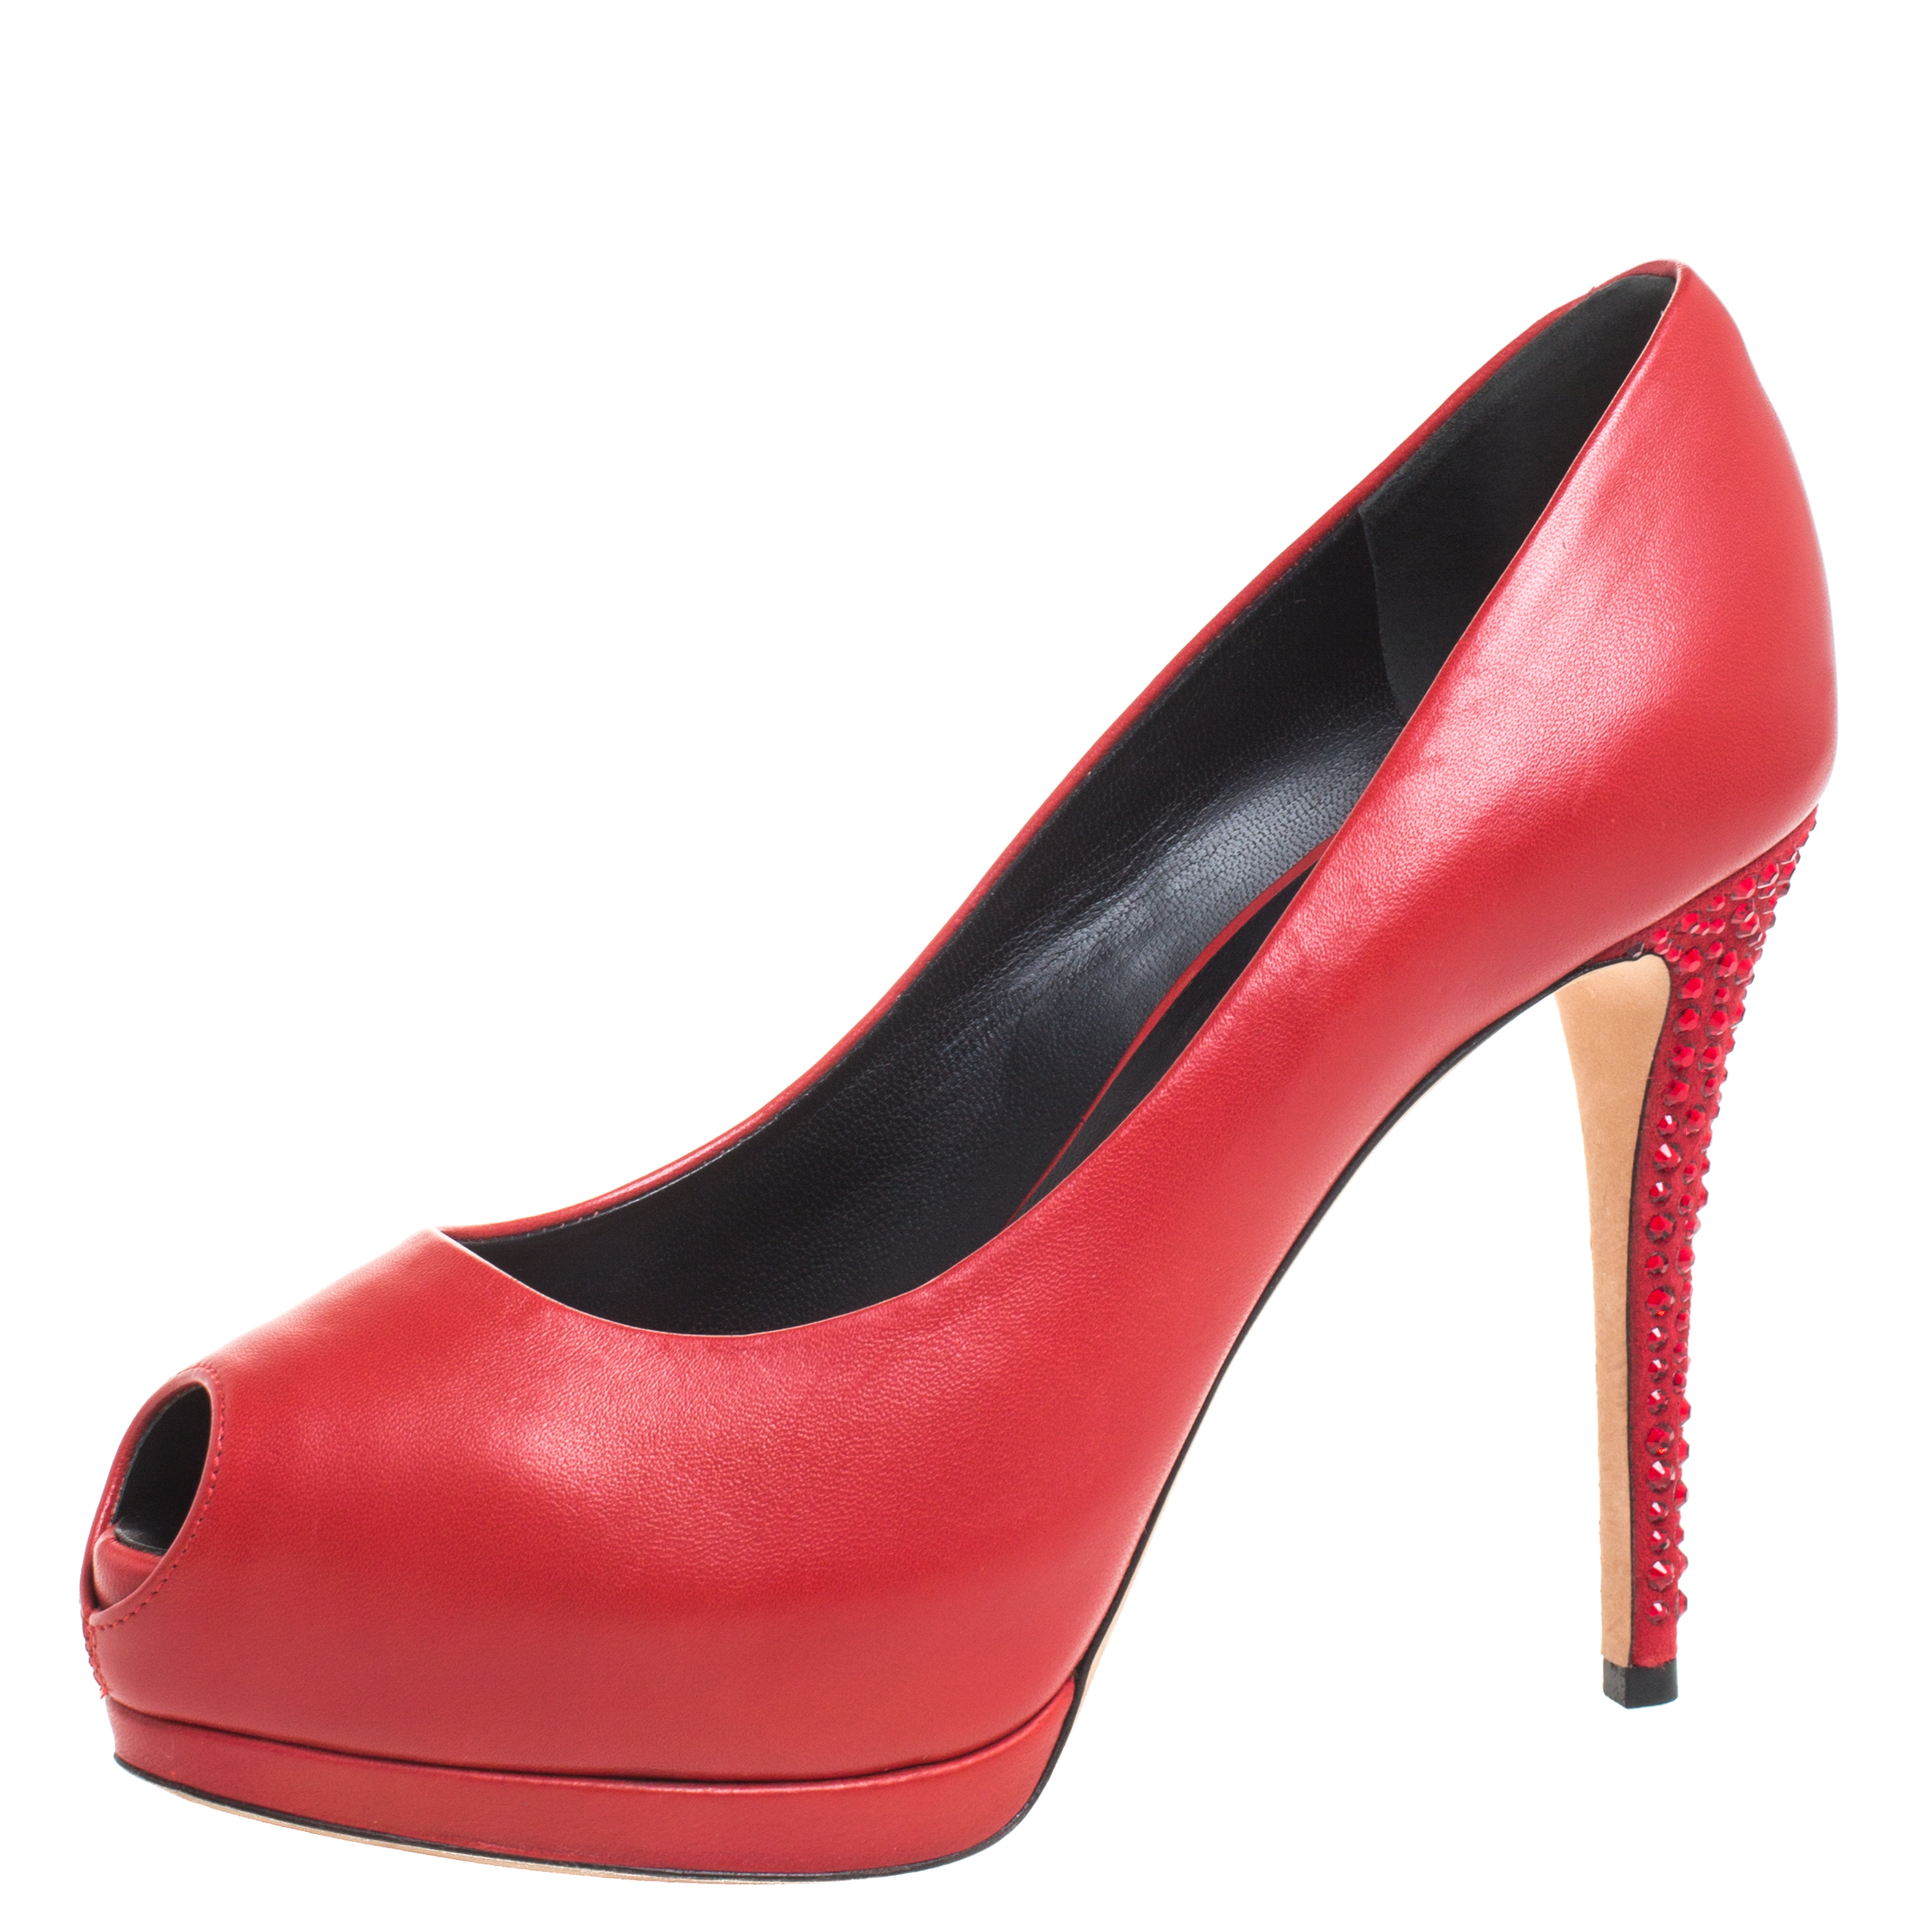 Giuseppe Zanotti Red Leather And Suede Crystal Embellished Peep Toe Platform Pumps Size 37